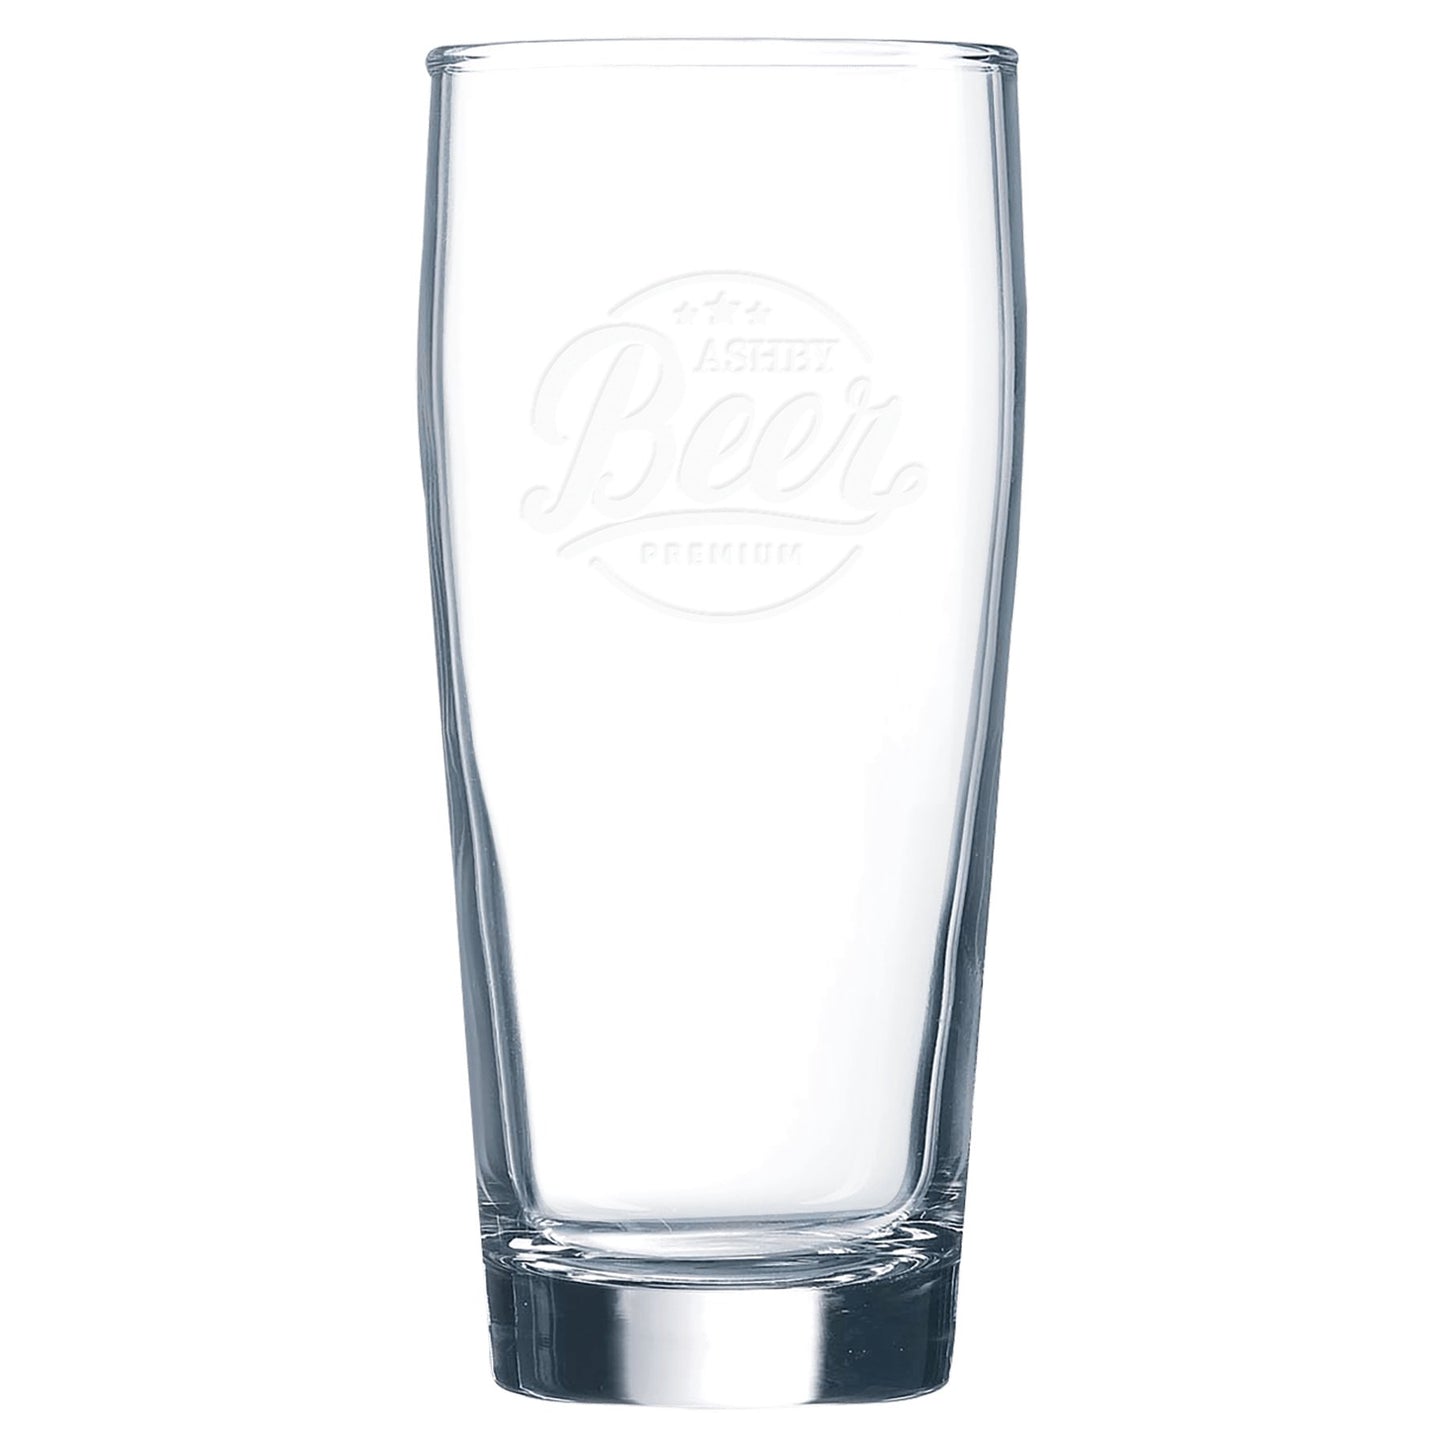 Etched Glasses - Everlasting Etchings, LLC